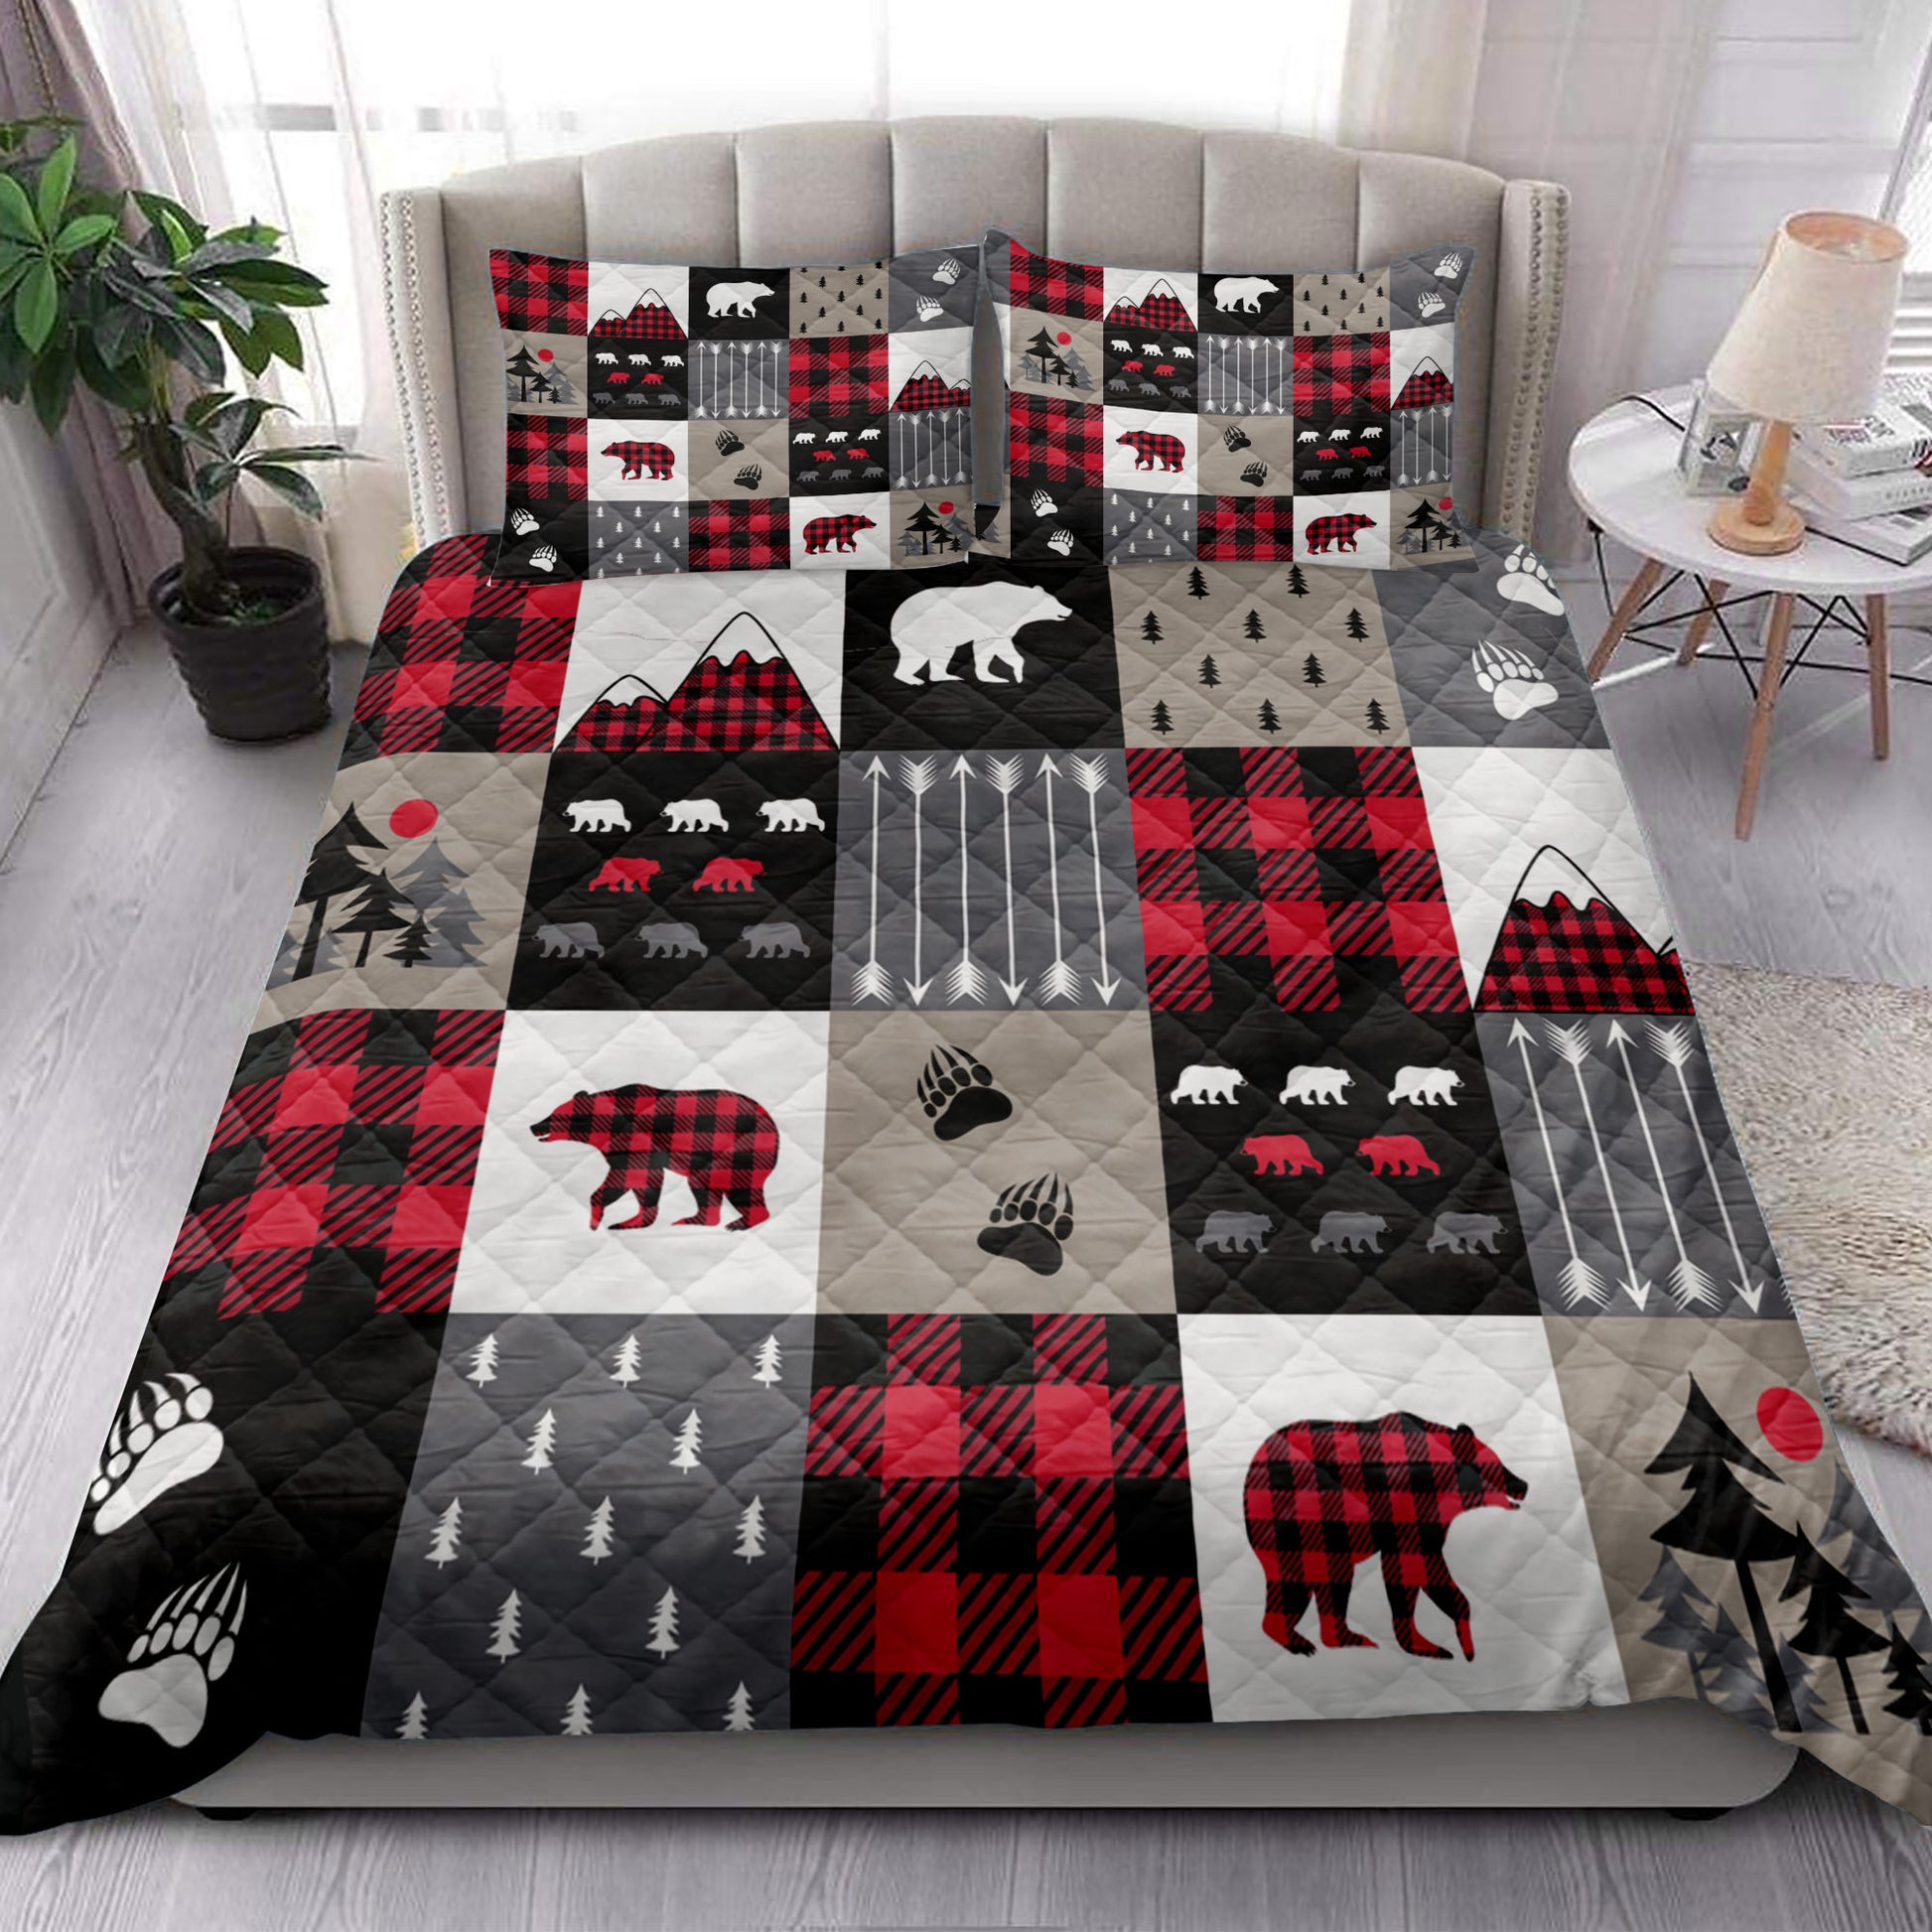 Ohaprints-Quilt-Bed-Set-Pillowcase-Cabin-Bear-Country-Patchwork-Bears-Mountains-Bear-Tracks-Arrows-Tree-Blanket-Bedspread-Bedding-4171-King (90'' x 100'')